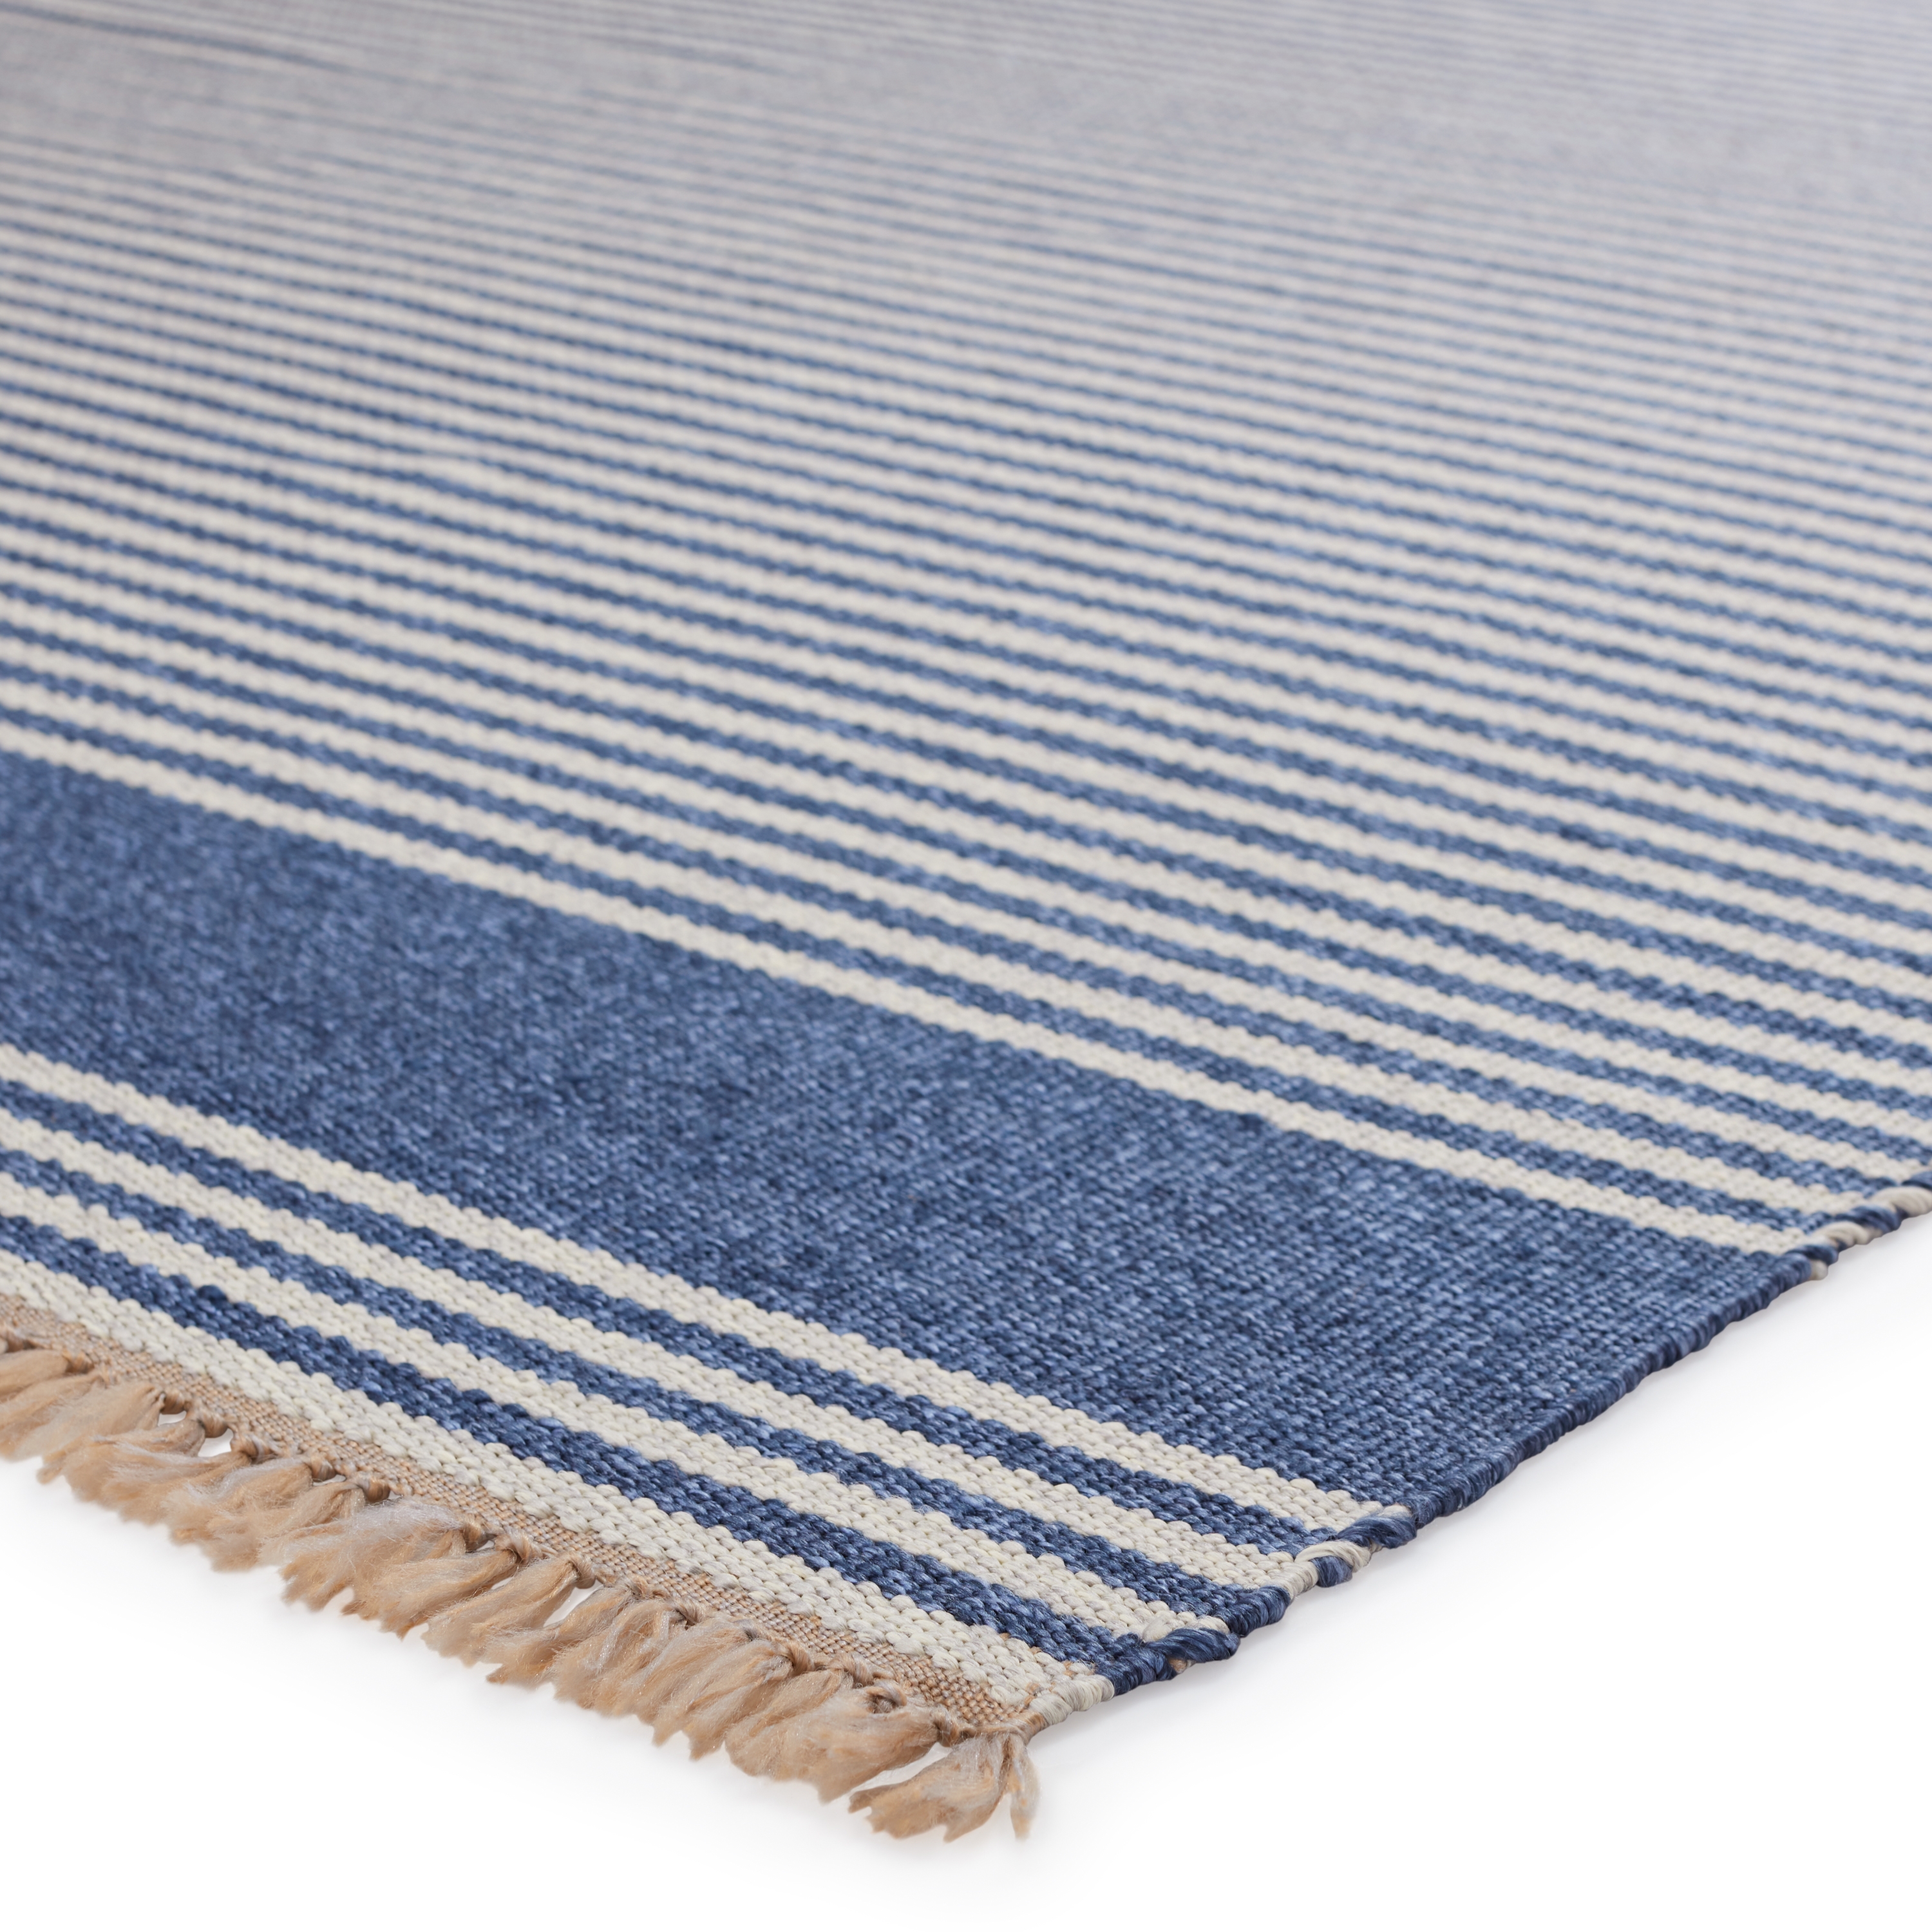 Vibe by Strand Indoor/ Outdoor Striped Blue/ Beige Area Rug (4'X6') - Image 1